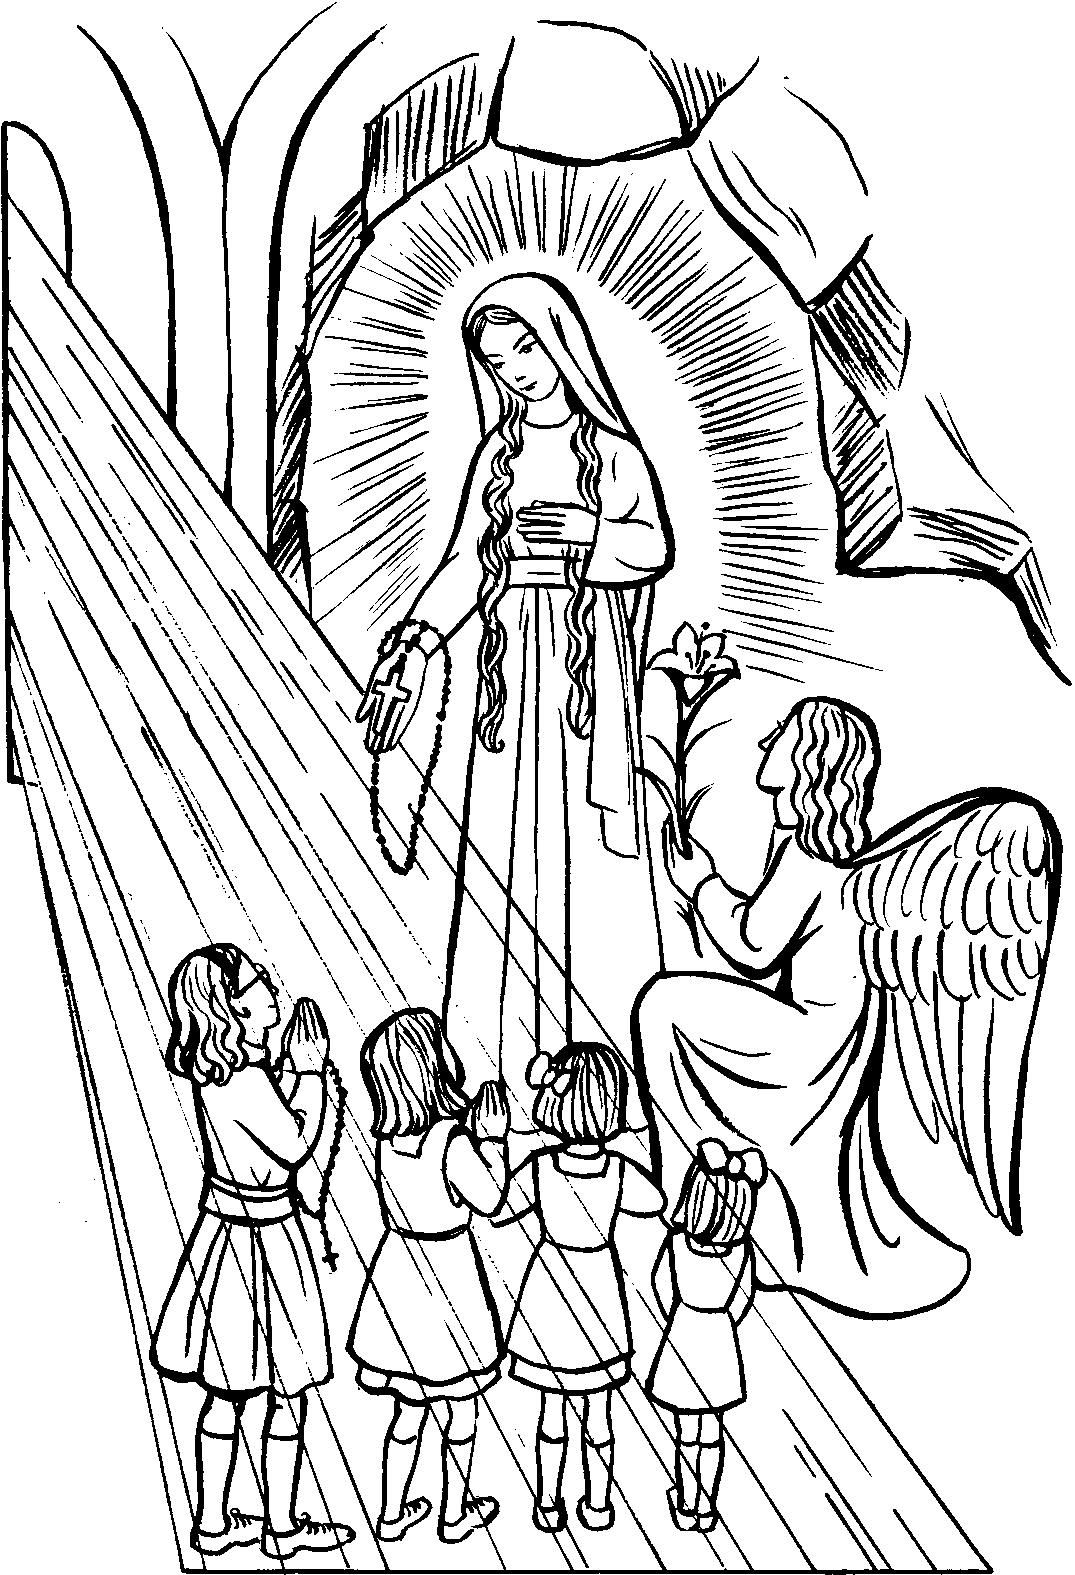 Our lady of the rosary catholic coloring page feast day is october catholic coloring coloring pages coloring pages inspirational